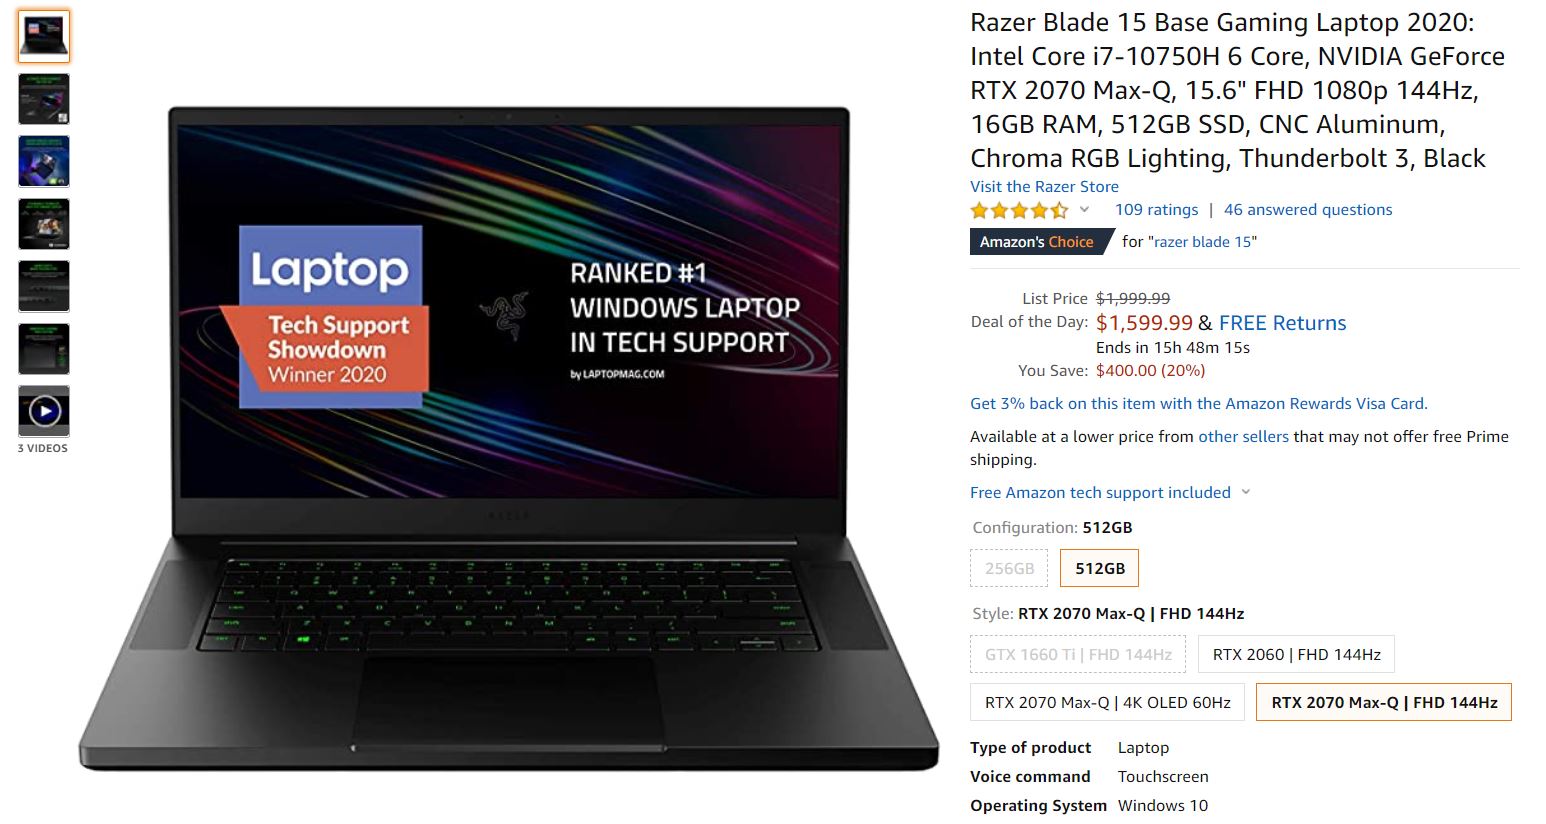 Razer Blade 15 Gaming Laptop Amazon Deal of the Day